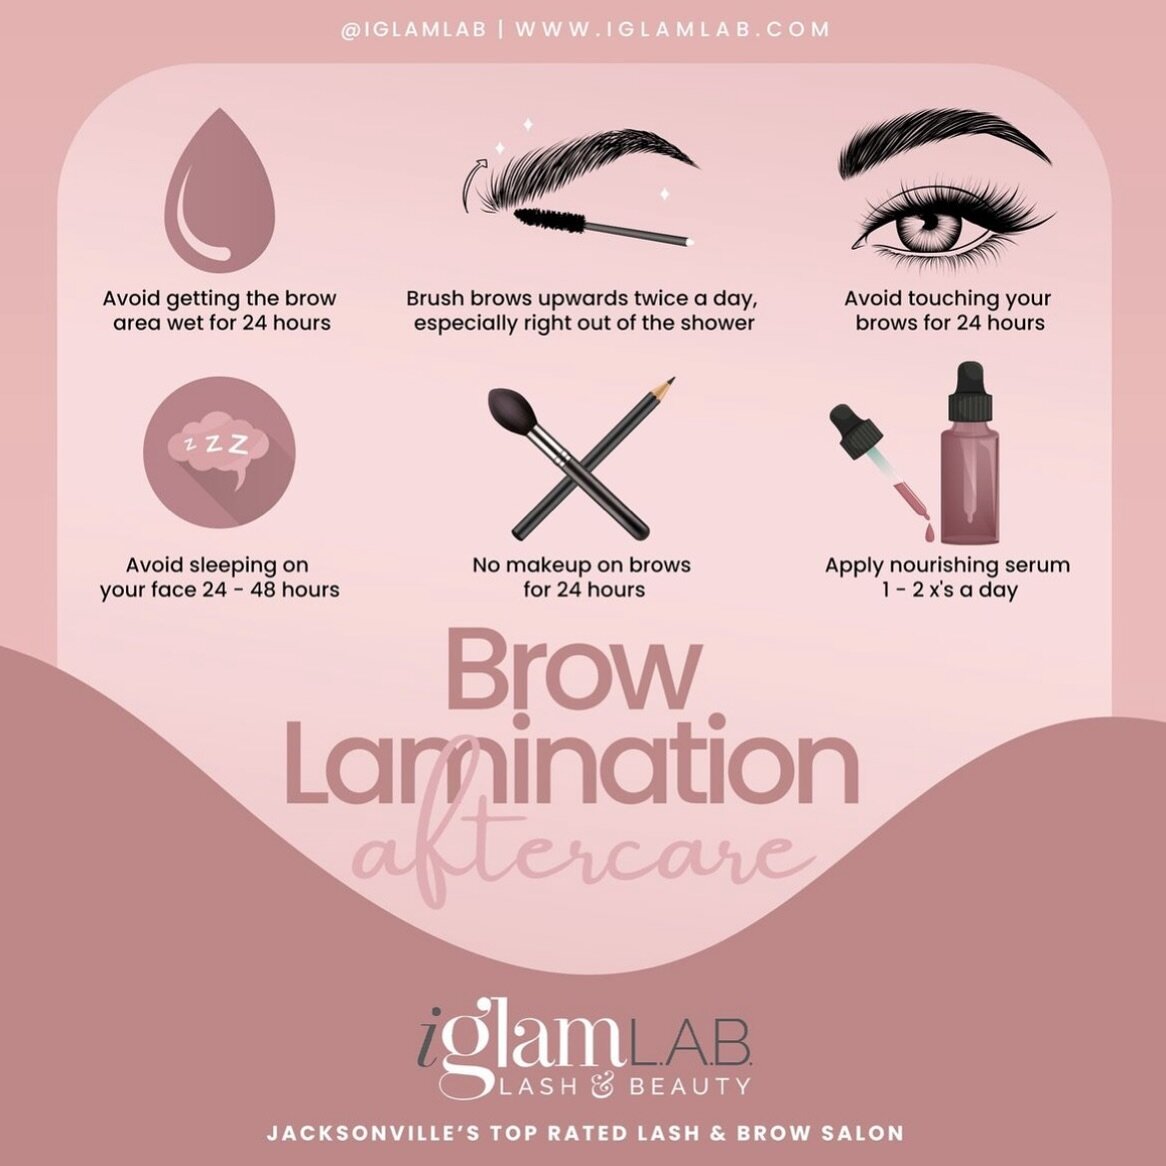 BROW TIP TUESDAY! 👆👆If you&rsquo;re considering trying our Brow Lamination service or you&rsquo;ve already experienced a lamination; here are a few tips to ensure the best, lasting results! 
.
Have questions? Comment below or give us a call at 904-